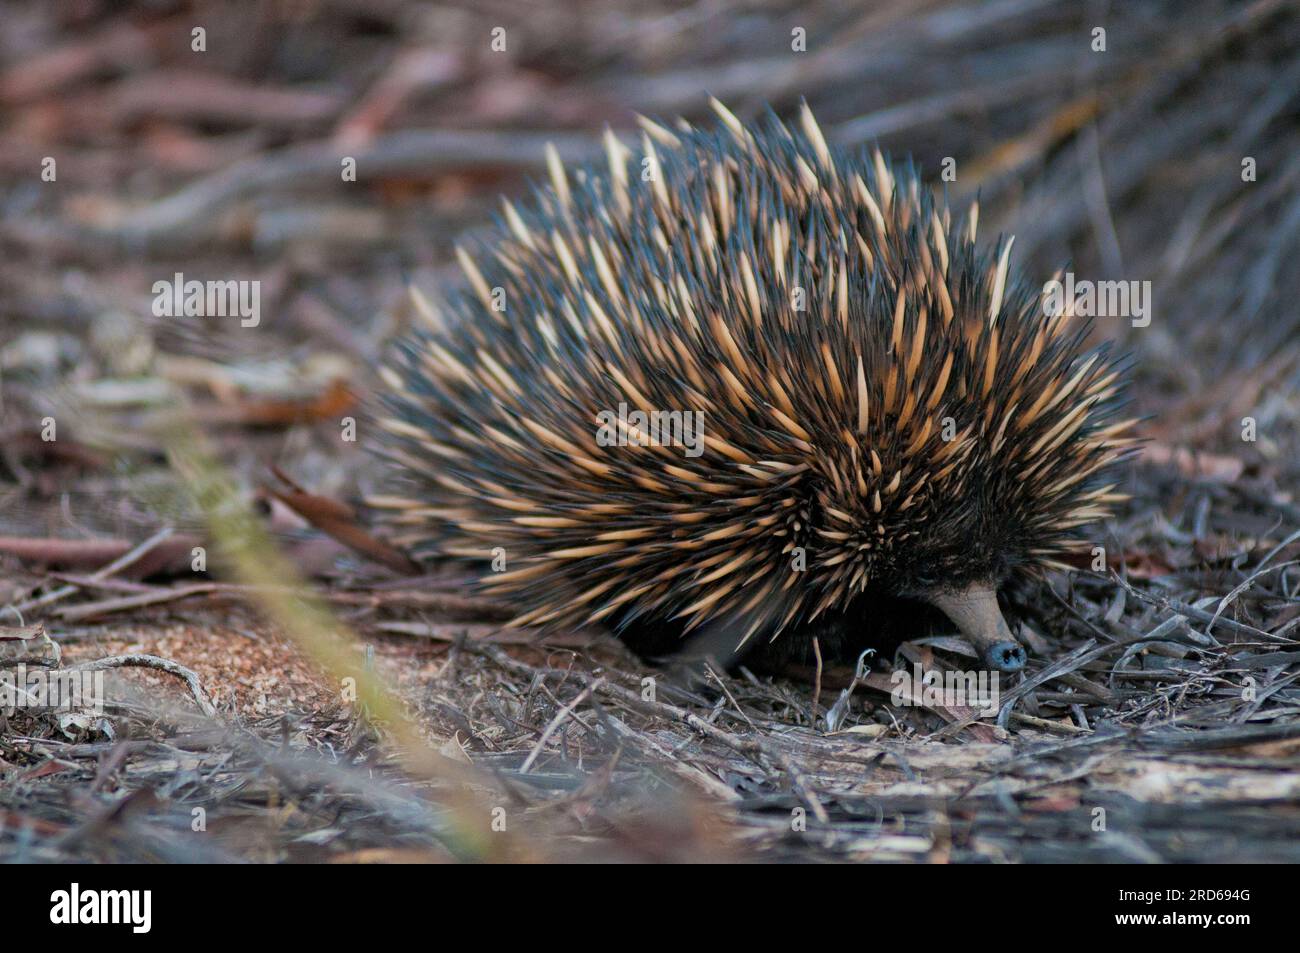 Spiny anteater, tachyglossus aculeatus, an echidna, Australia Occidentale Foto Stock